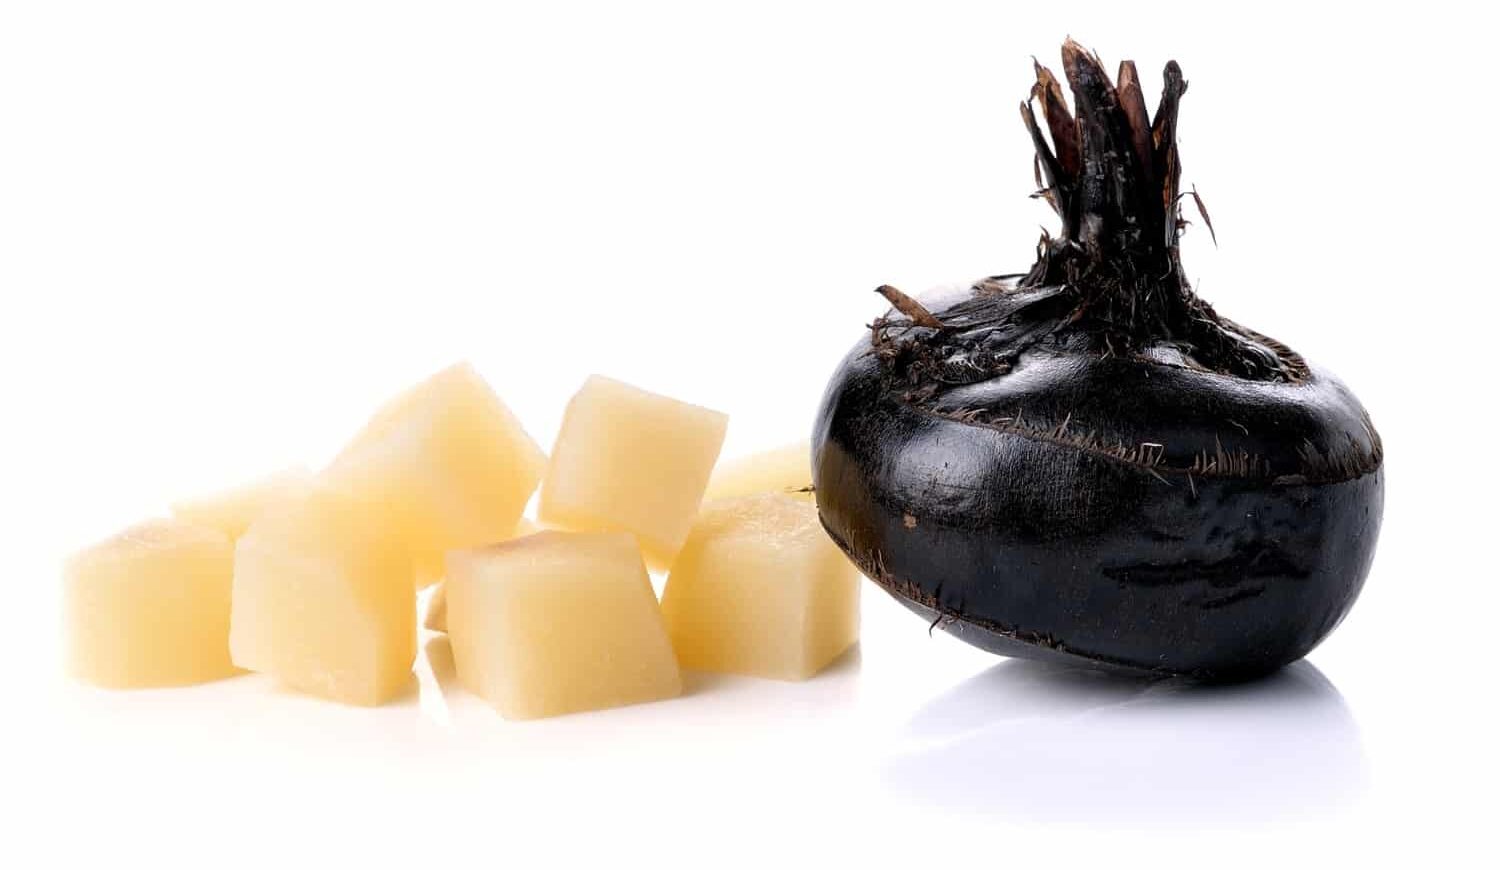 A whole black water chestnut sits next to cubes of the vegetable that has been skinned and ready for adding to stir-fries.